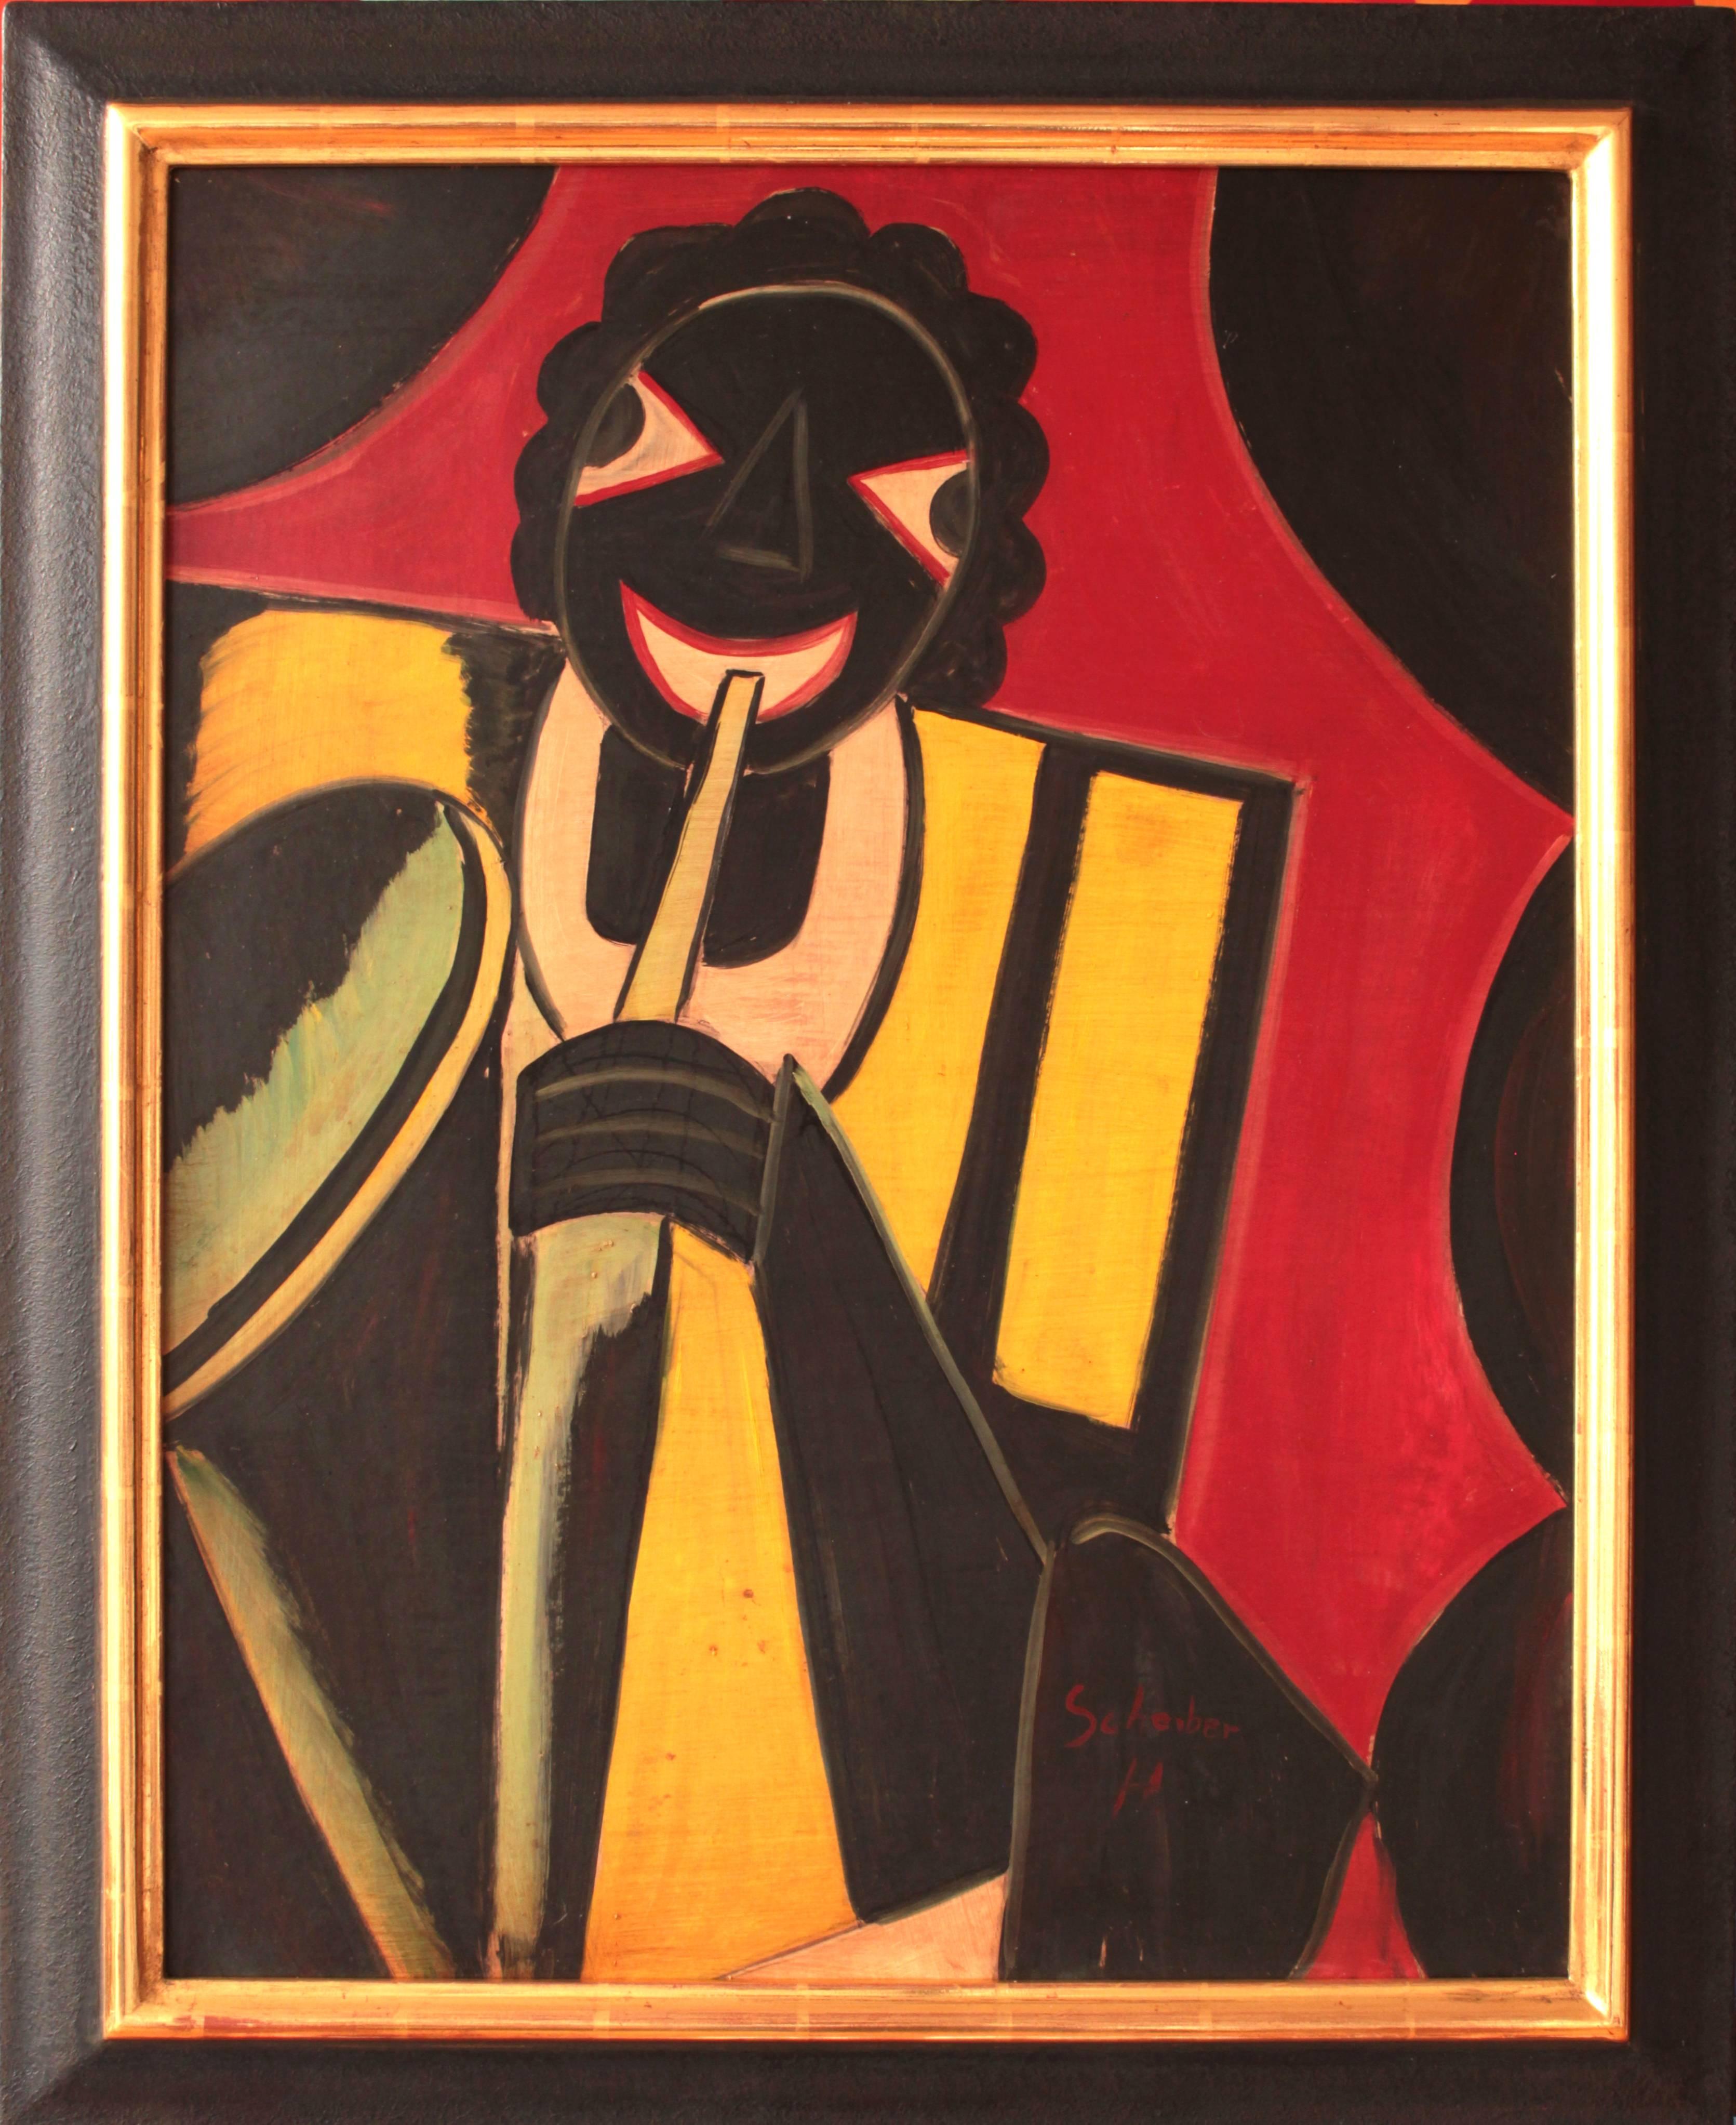 Oil on wood, 1930. Signed lower right. Framed. Height 31.10 in ( 79 cm ), Width 25.19 in ( 64 cm )

The Hungarian artist Hugó Scheiber lived 1922-1934 in Berlin, that's where he painted this typical cubistic scene.


